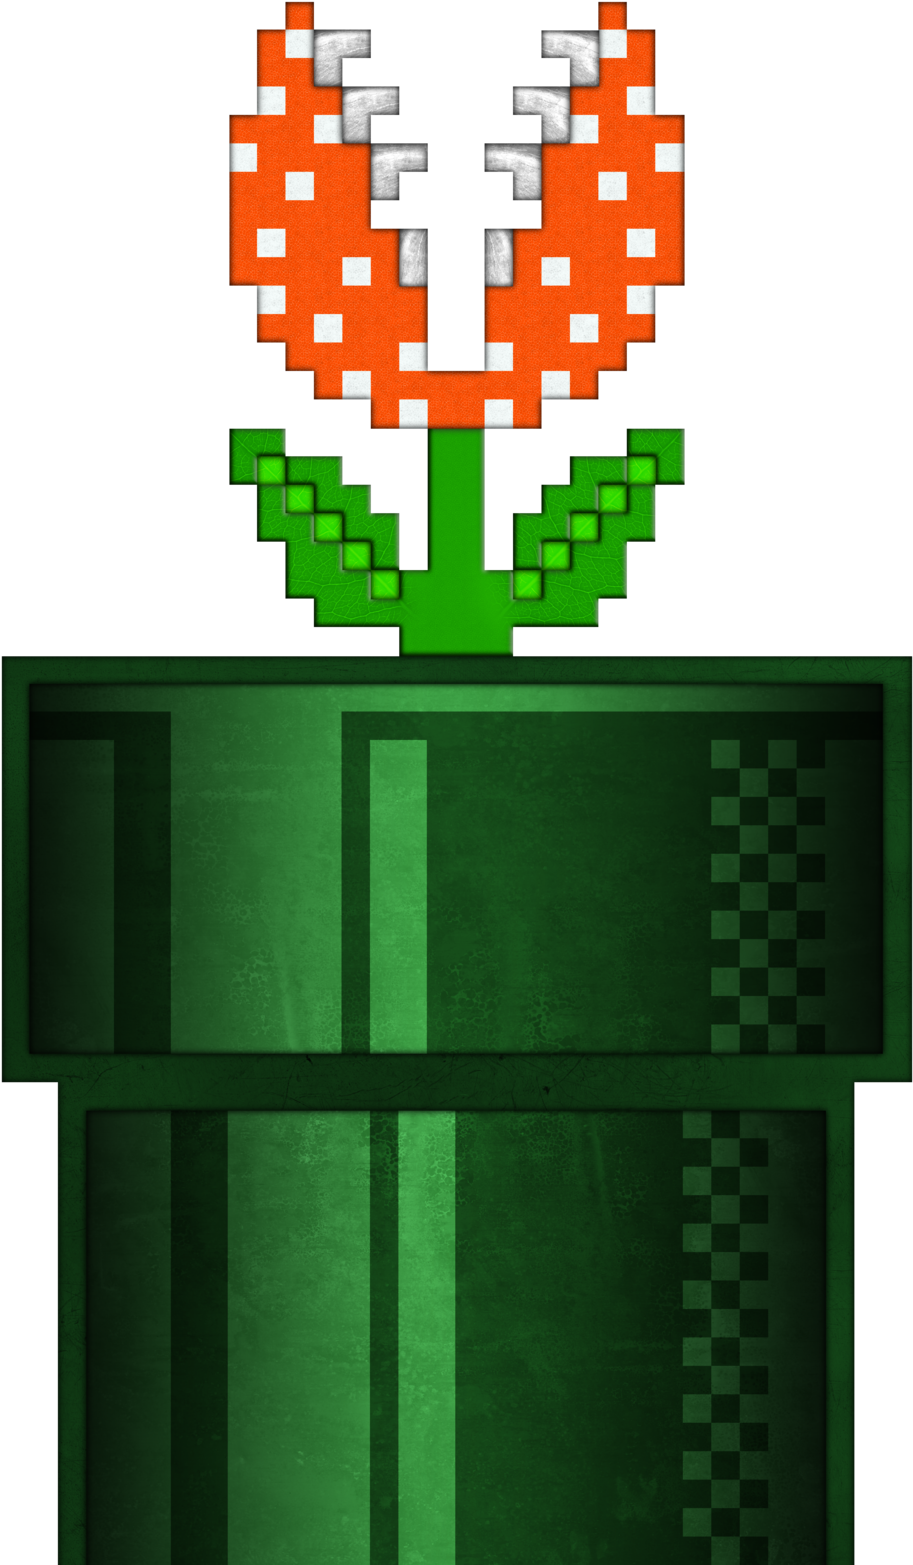 Brulescorrupted Real Life 8 Bit Piranha Plant By Brulescorrupted - Super Mario Piranha Plant 8 Bit (1024x1707)